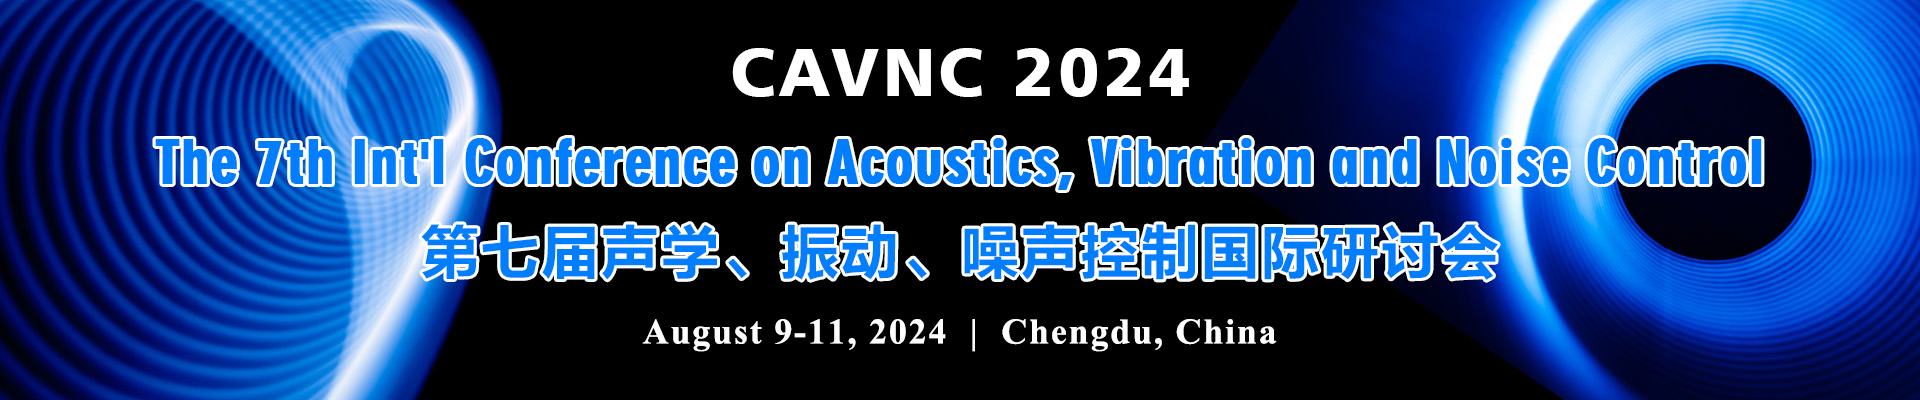 The 7th Int'l Conference on Acoustics, Vibration and Noise Control (CAVNC 2024), Chengdu, Sichuan, China